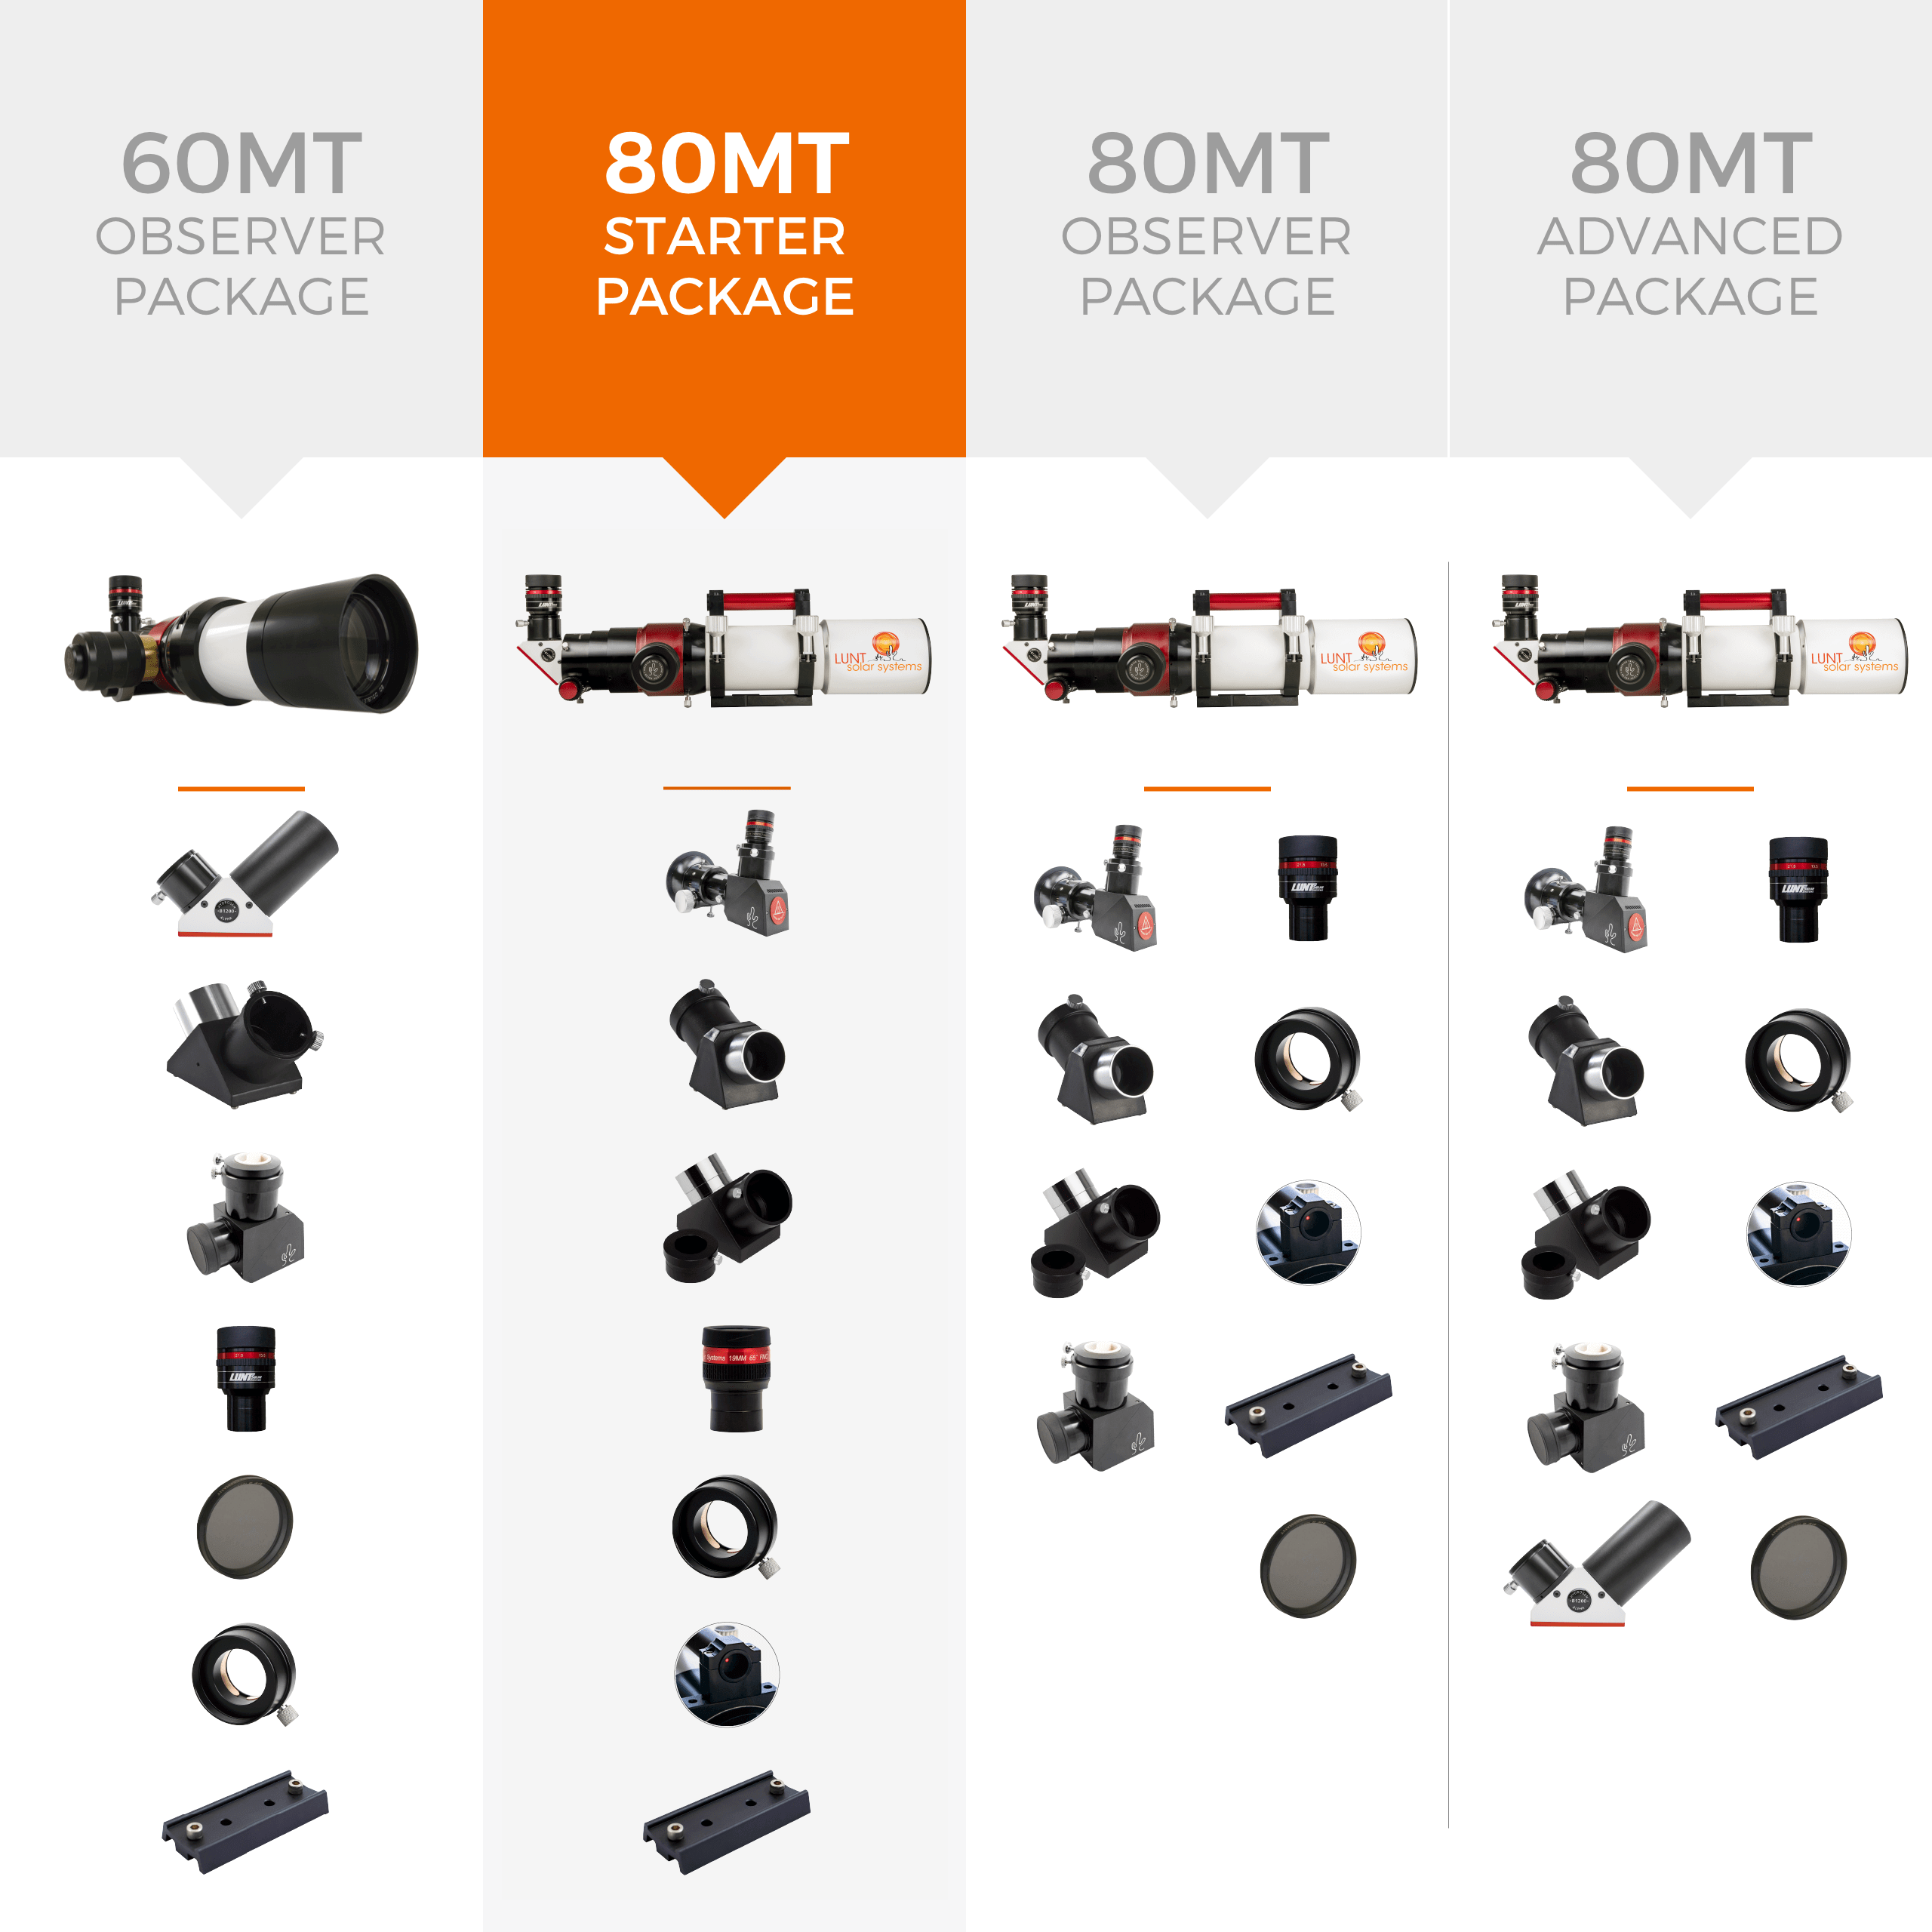 Day and Night Modular Professional Telescope LS60MT Basic Package Lunt Solar Systems All-in-one 60mm Aperture Refractor Astronomy Kit for Observing The Sun & Space